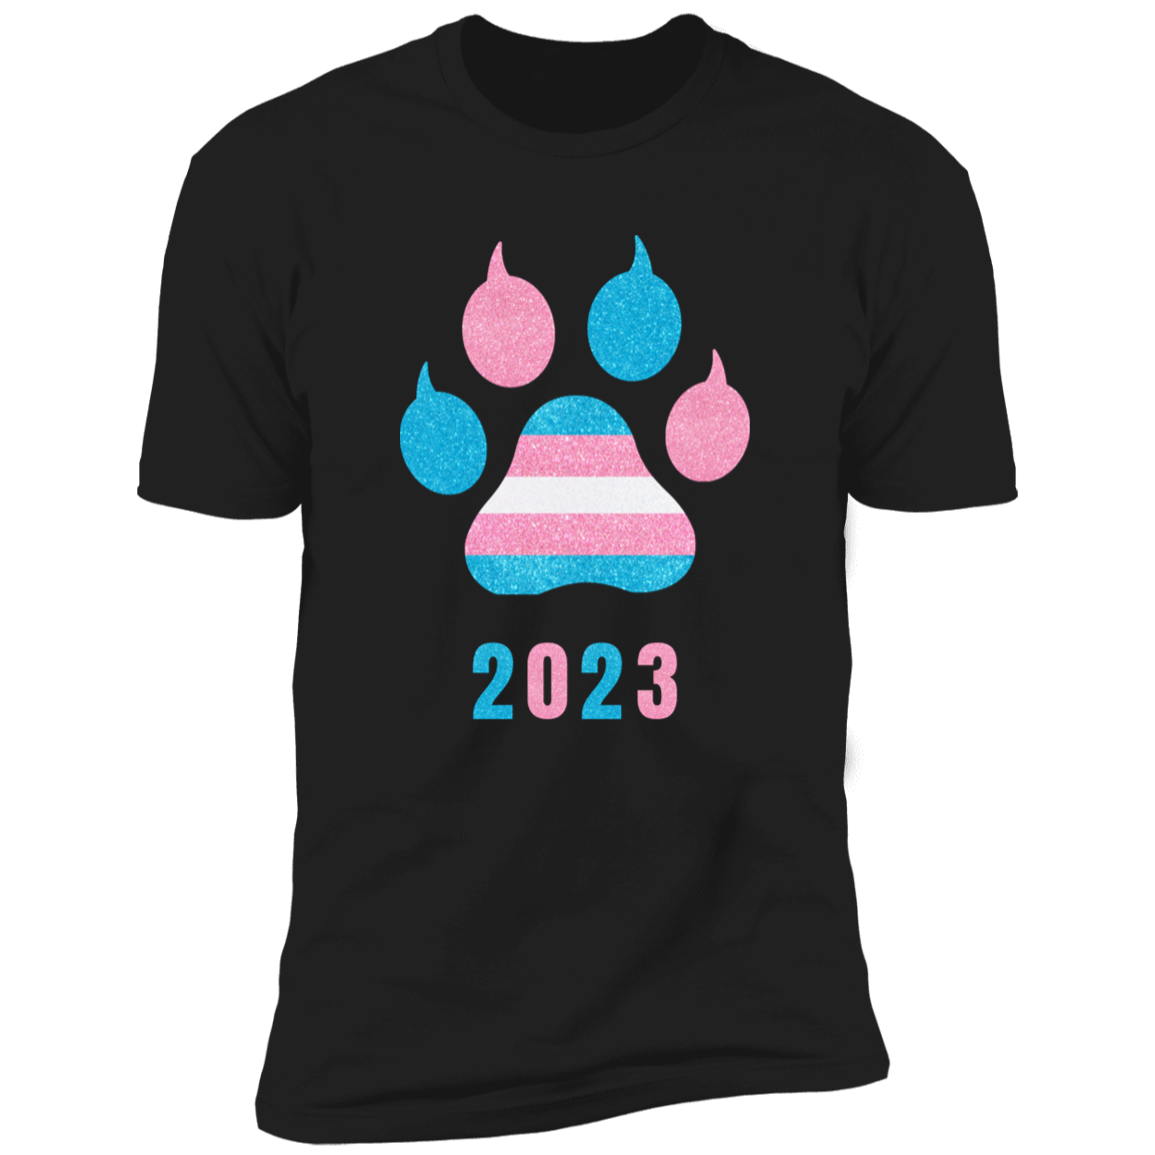 Trans Pride 2023 Cat Paw trans pride t-shirt,  trans cat paw pride shirt for humans, in black